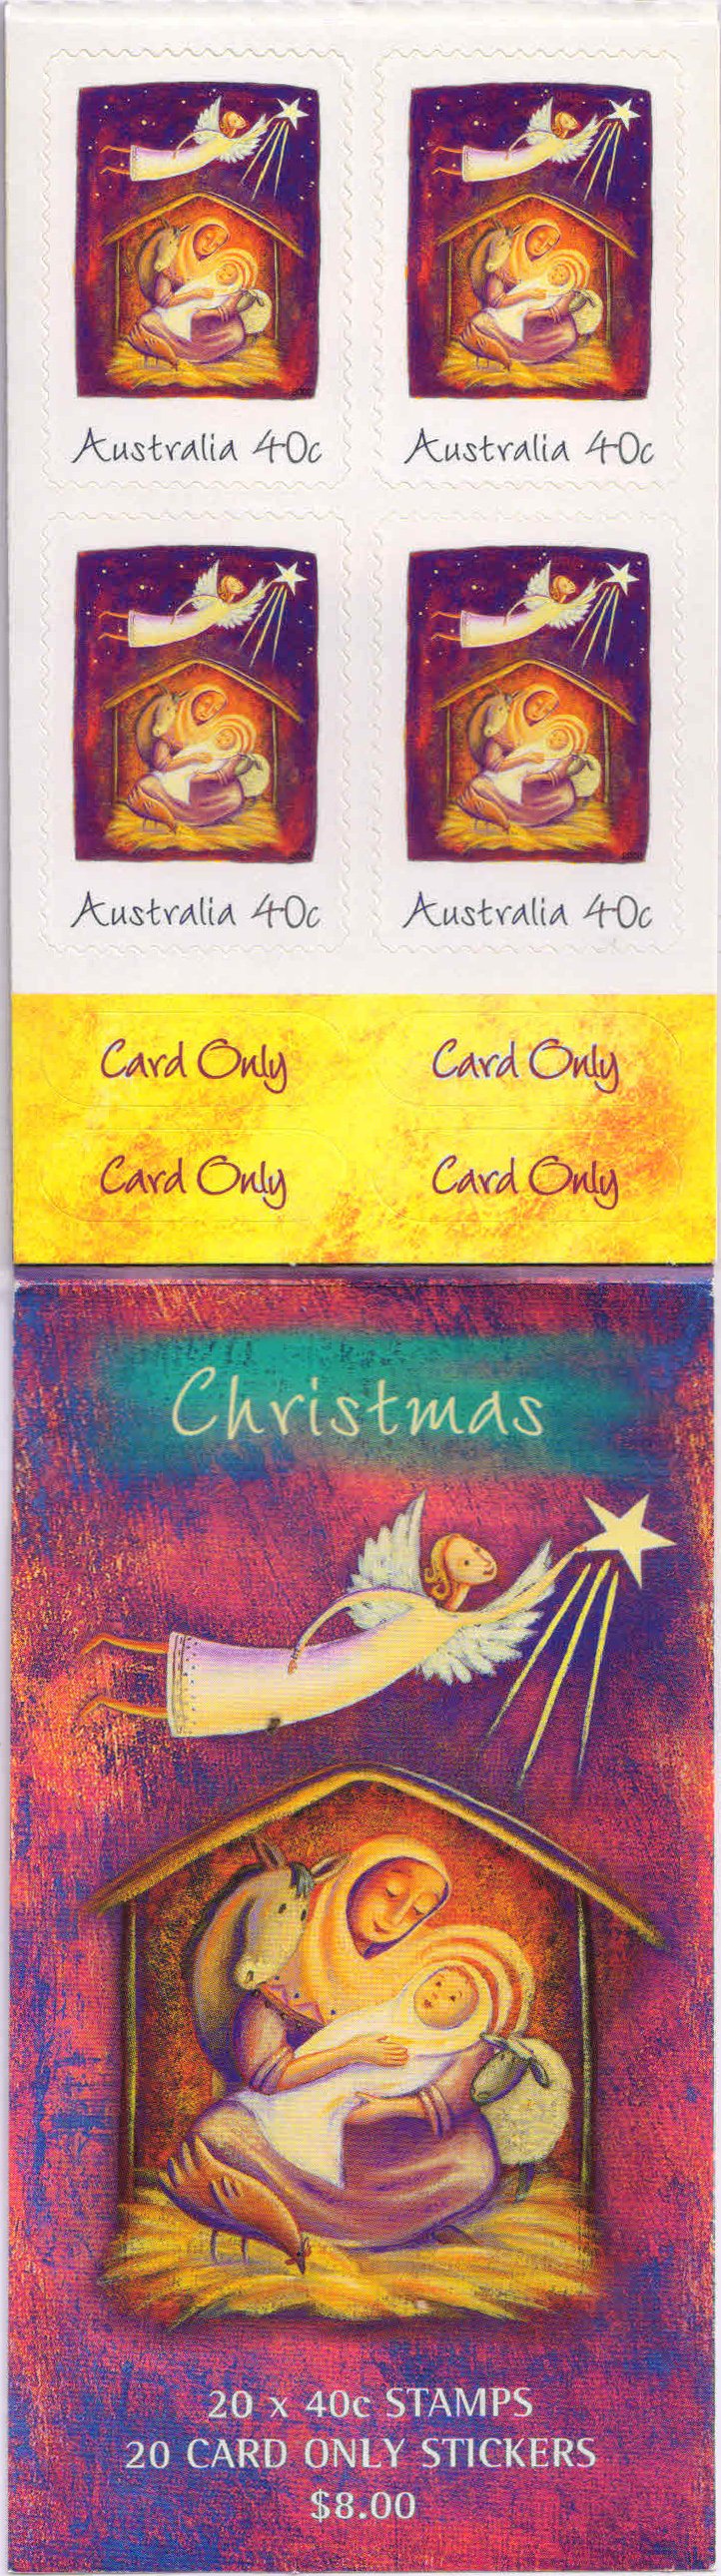 AUSTRALIA 2002-Christmas, Booklet of 20 x 40c Stamps, Face $ 8.00, S.G. 2251